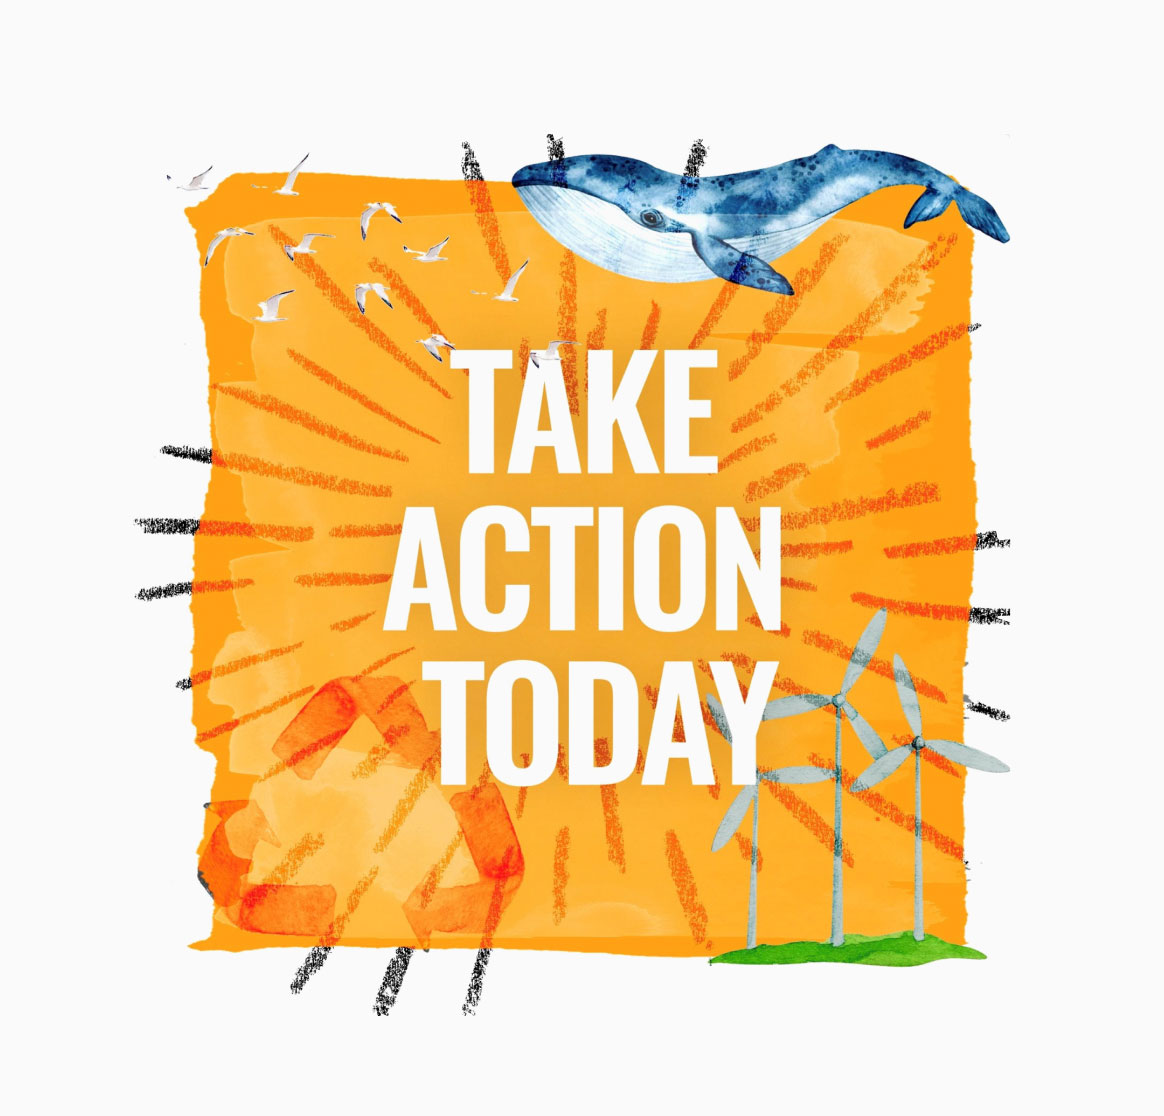 Take action today